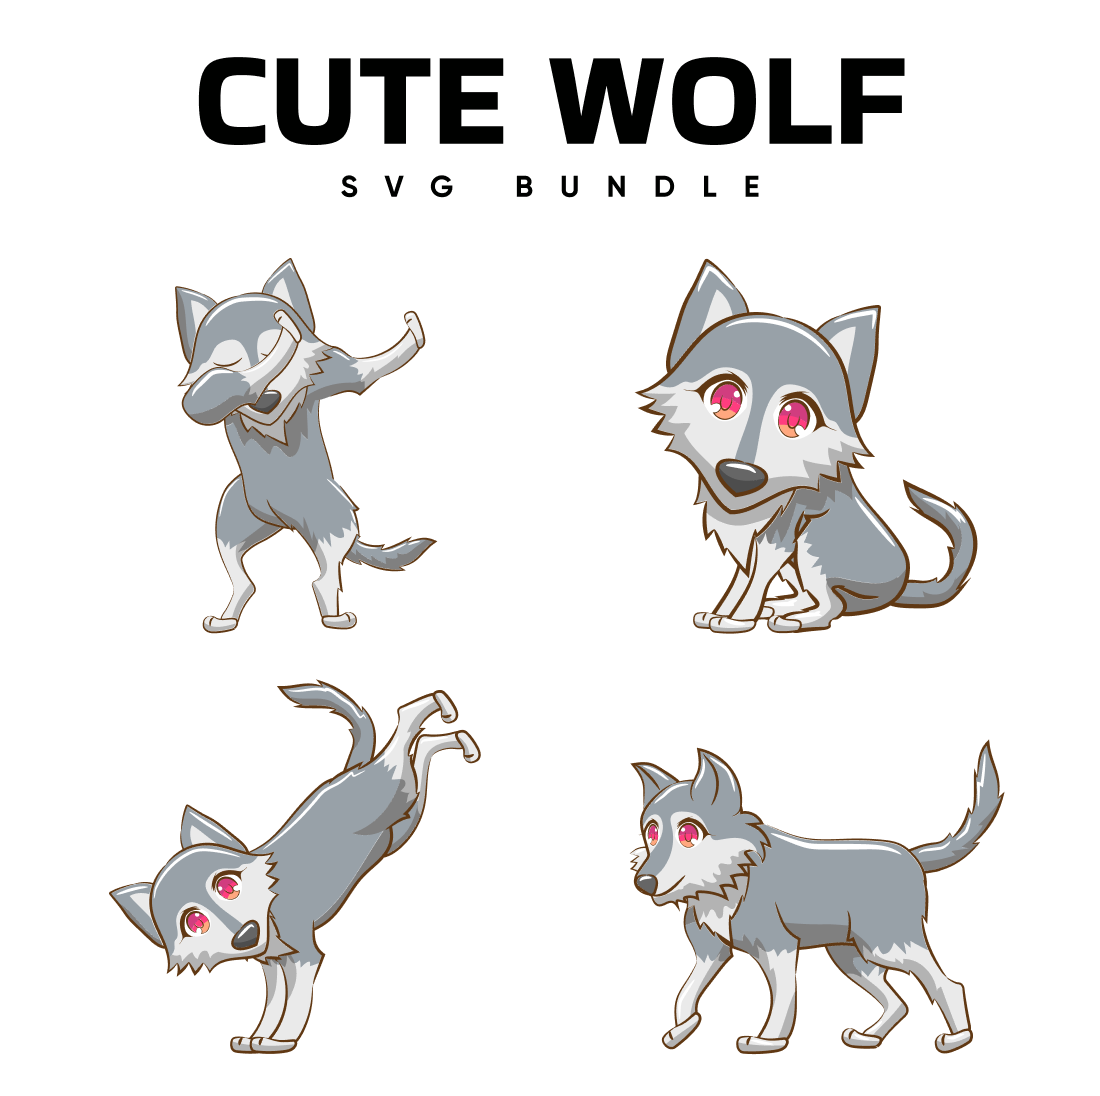 The cute wolf svg bundle includes a wolf.